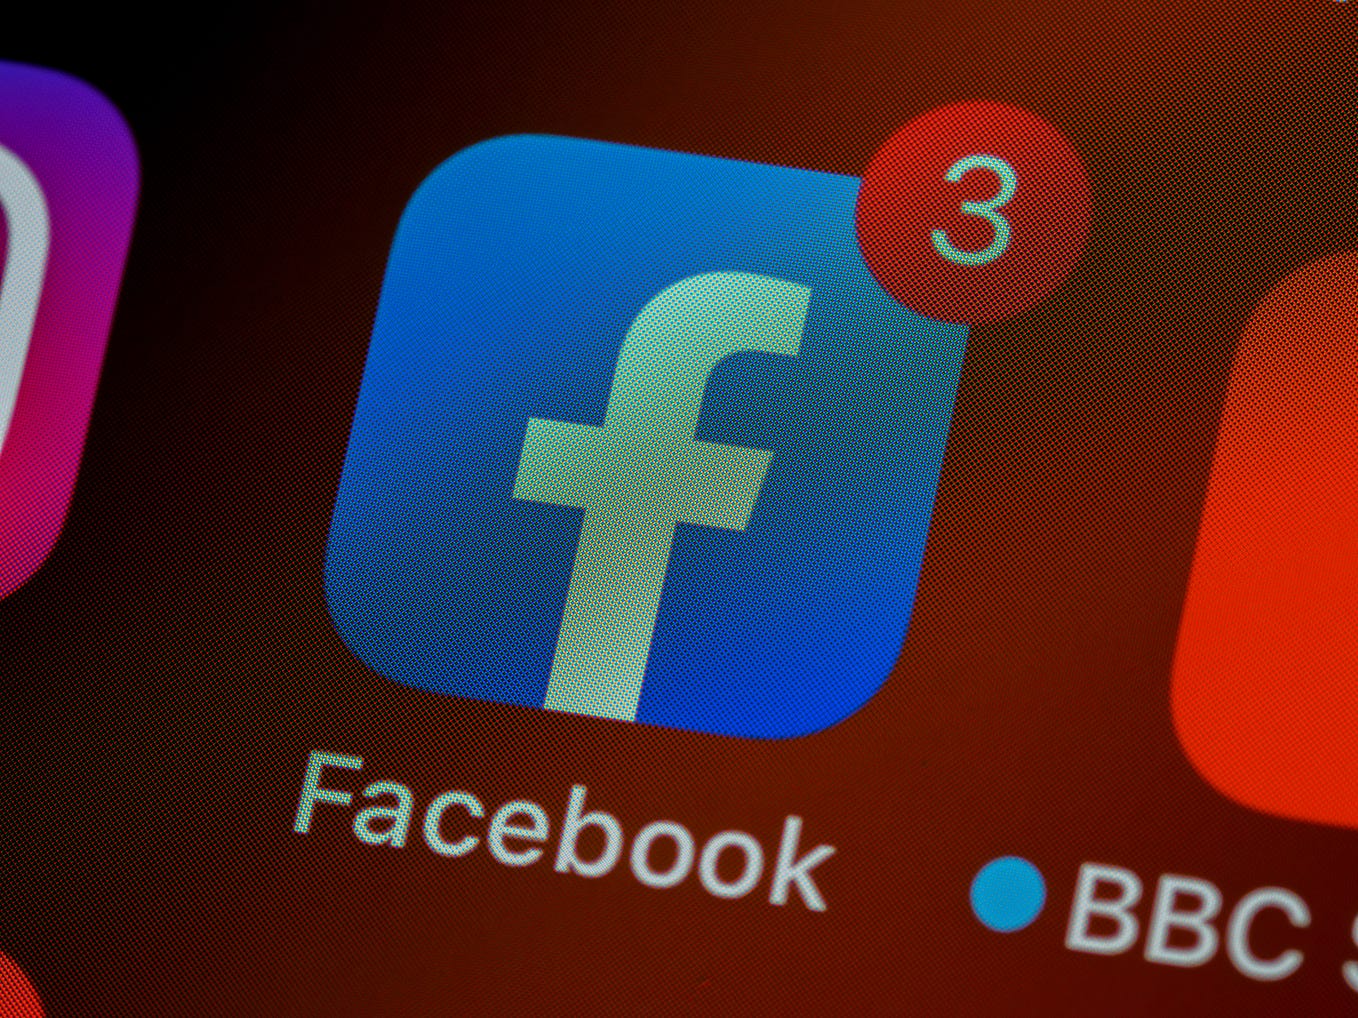 Facebook: Exploring Usability, Influence and its Dark Side